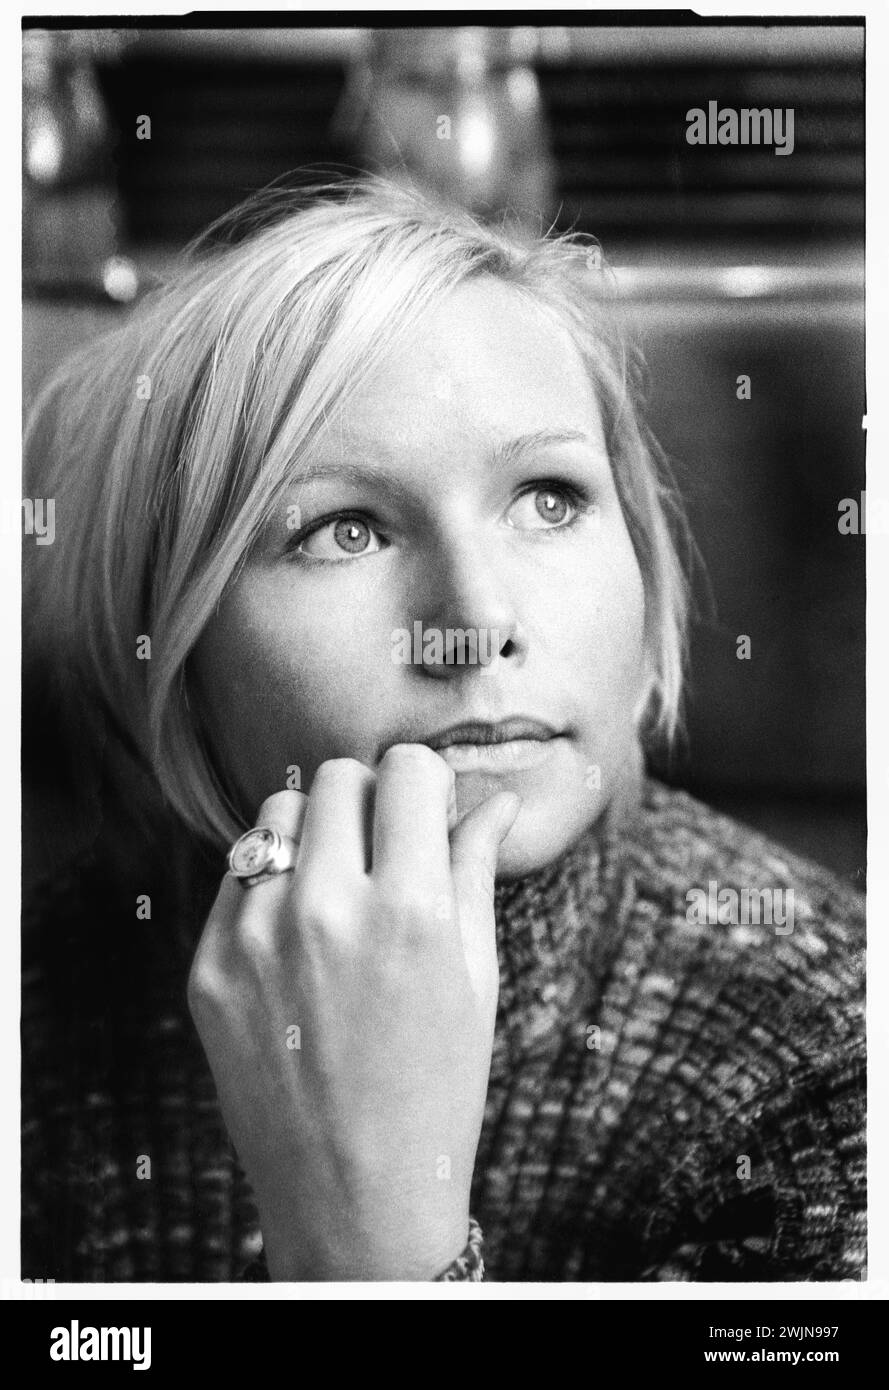 NINA PERSSON, PORTRAIT, 1996: A portrait of Swedish singer Nina Persson of the Cardigans at Al Bacio Italian Restaurant in Bristol, England , UK on 9 November 1996. Photo: Rob Watkins.  INFO: The Cardigans, a Swedish band formed in the early '90s, gained international fame with hits like 'Lovefool.' Their eclectic sound merges pop, rock, and indie elements, marked by Nina Persson's distinctive vocals and a penchant for catchy melodies Stock Photo